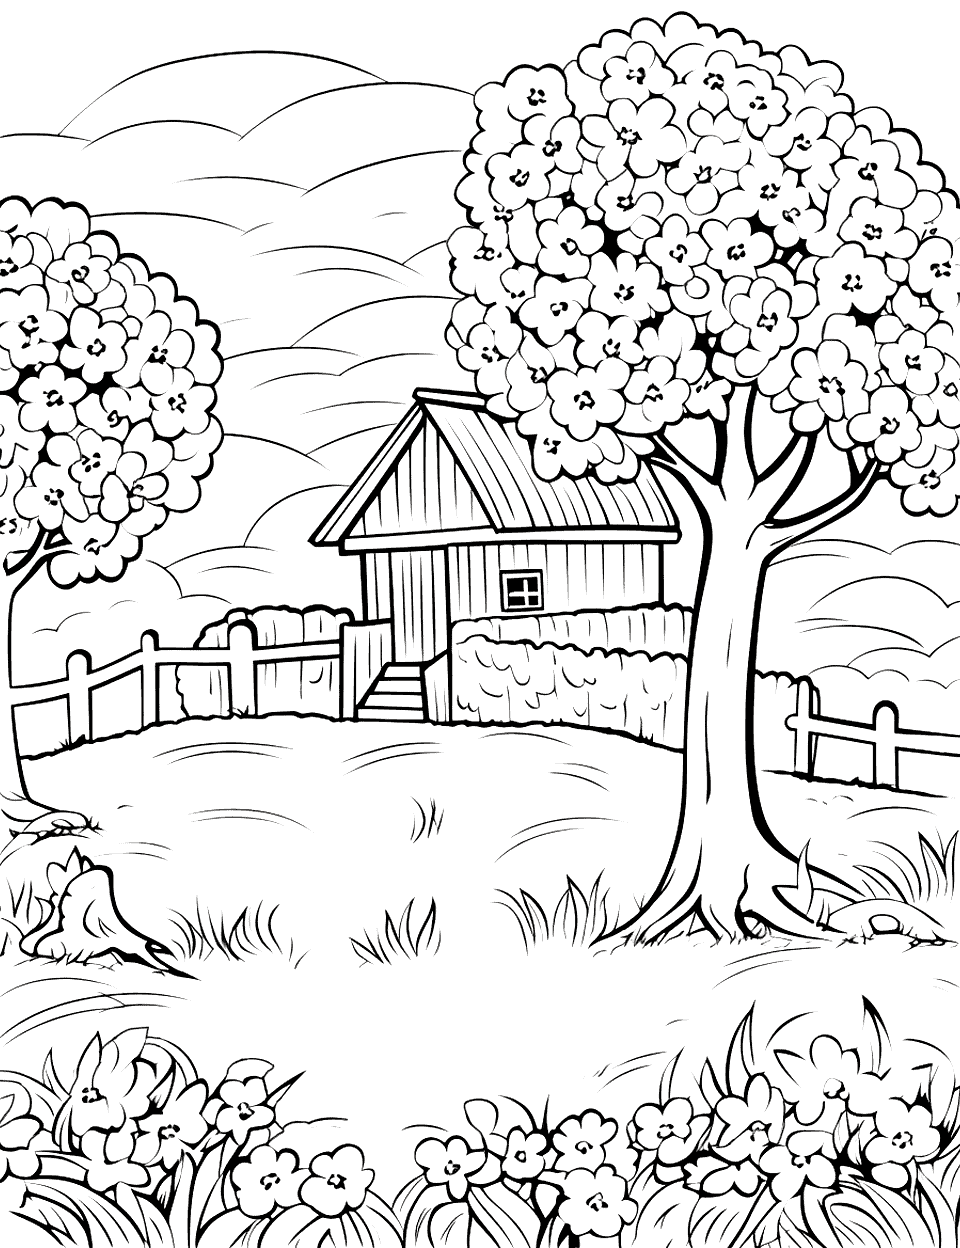 Springtime Blossoms Farm Coloring Page - Trees in blossom around the farmyard.